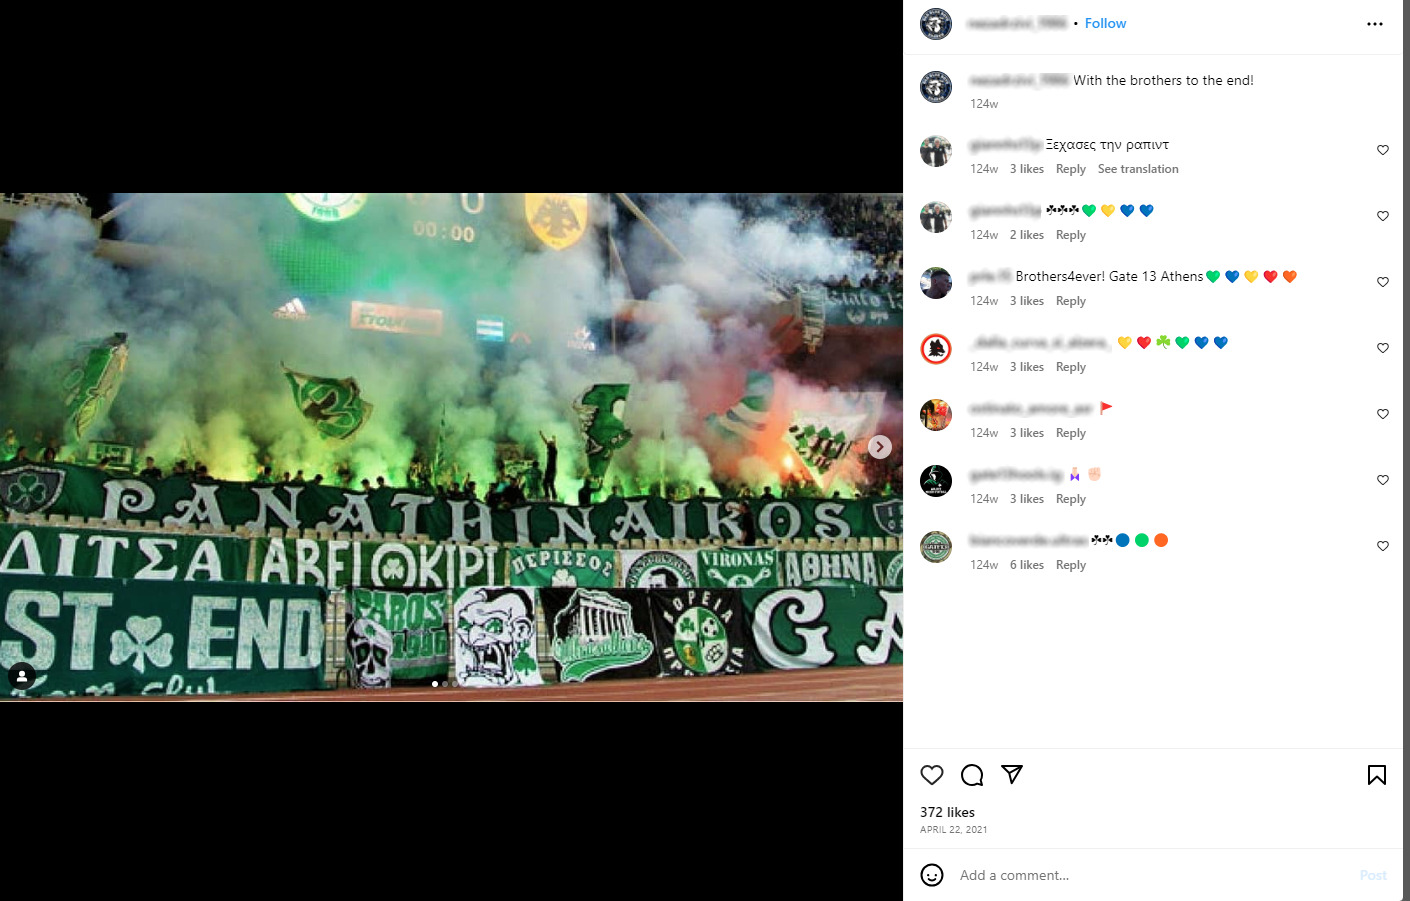 In this image, which was posted on an Instagram profile related to the fan movement of the Croatian football team Dinamo Zagreb, the stand of the fanatical Panathinaikos fans is depicted. The description reads: 'With the brothers to the end'.